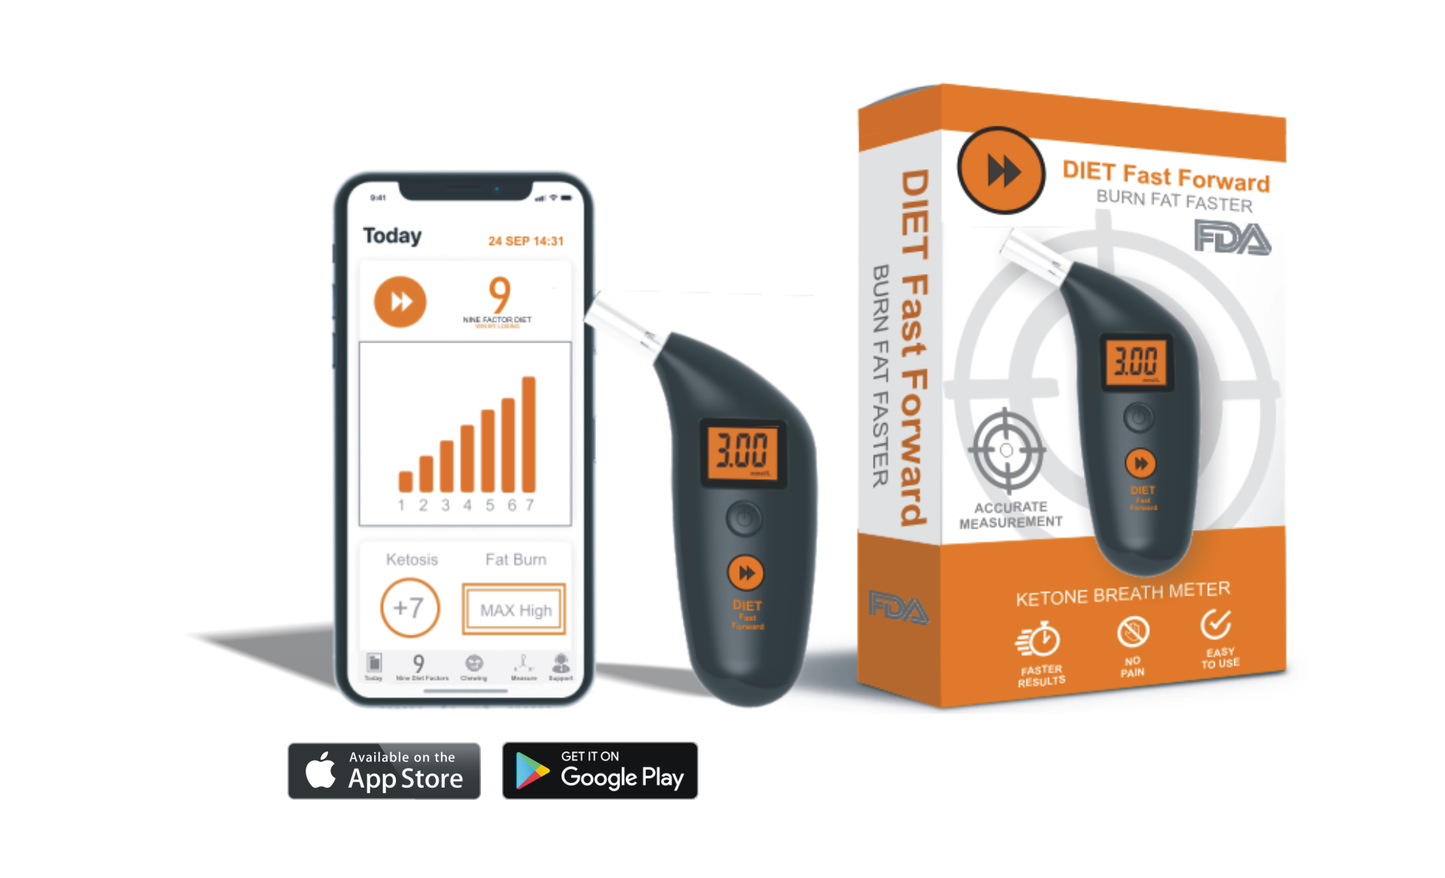 BOOST YOUR IMMUNITY: Diet Fast Forward 2.0 The Complete Ketone Meter And App System - Take Control With A Reliable Partner And Improve Your Health Today!